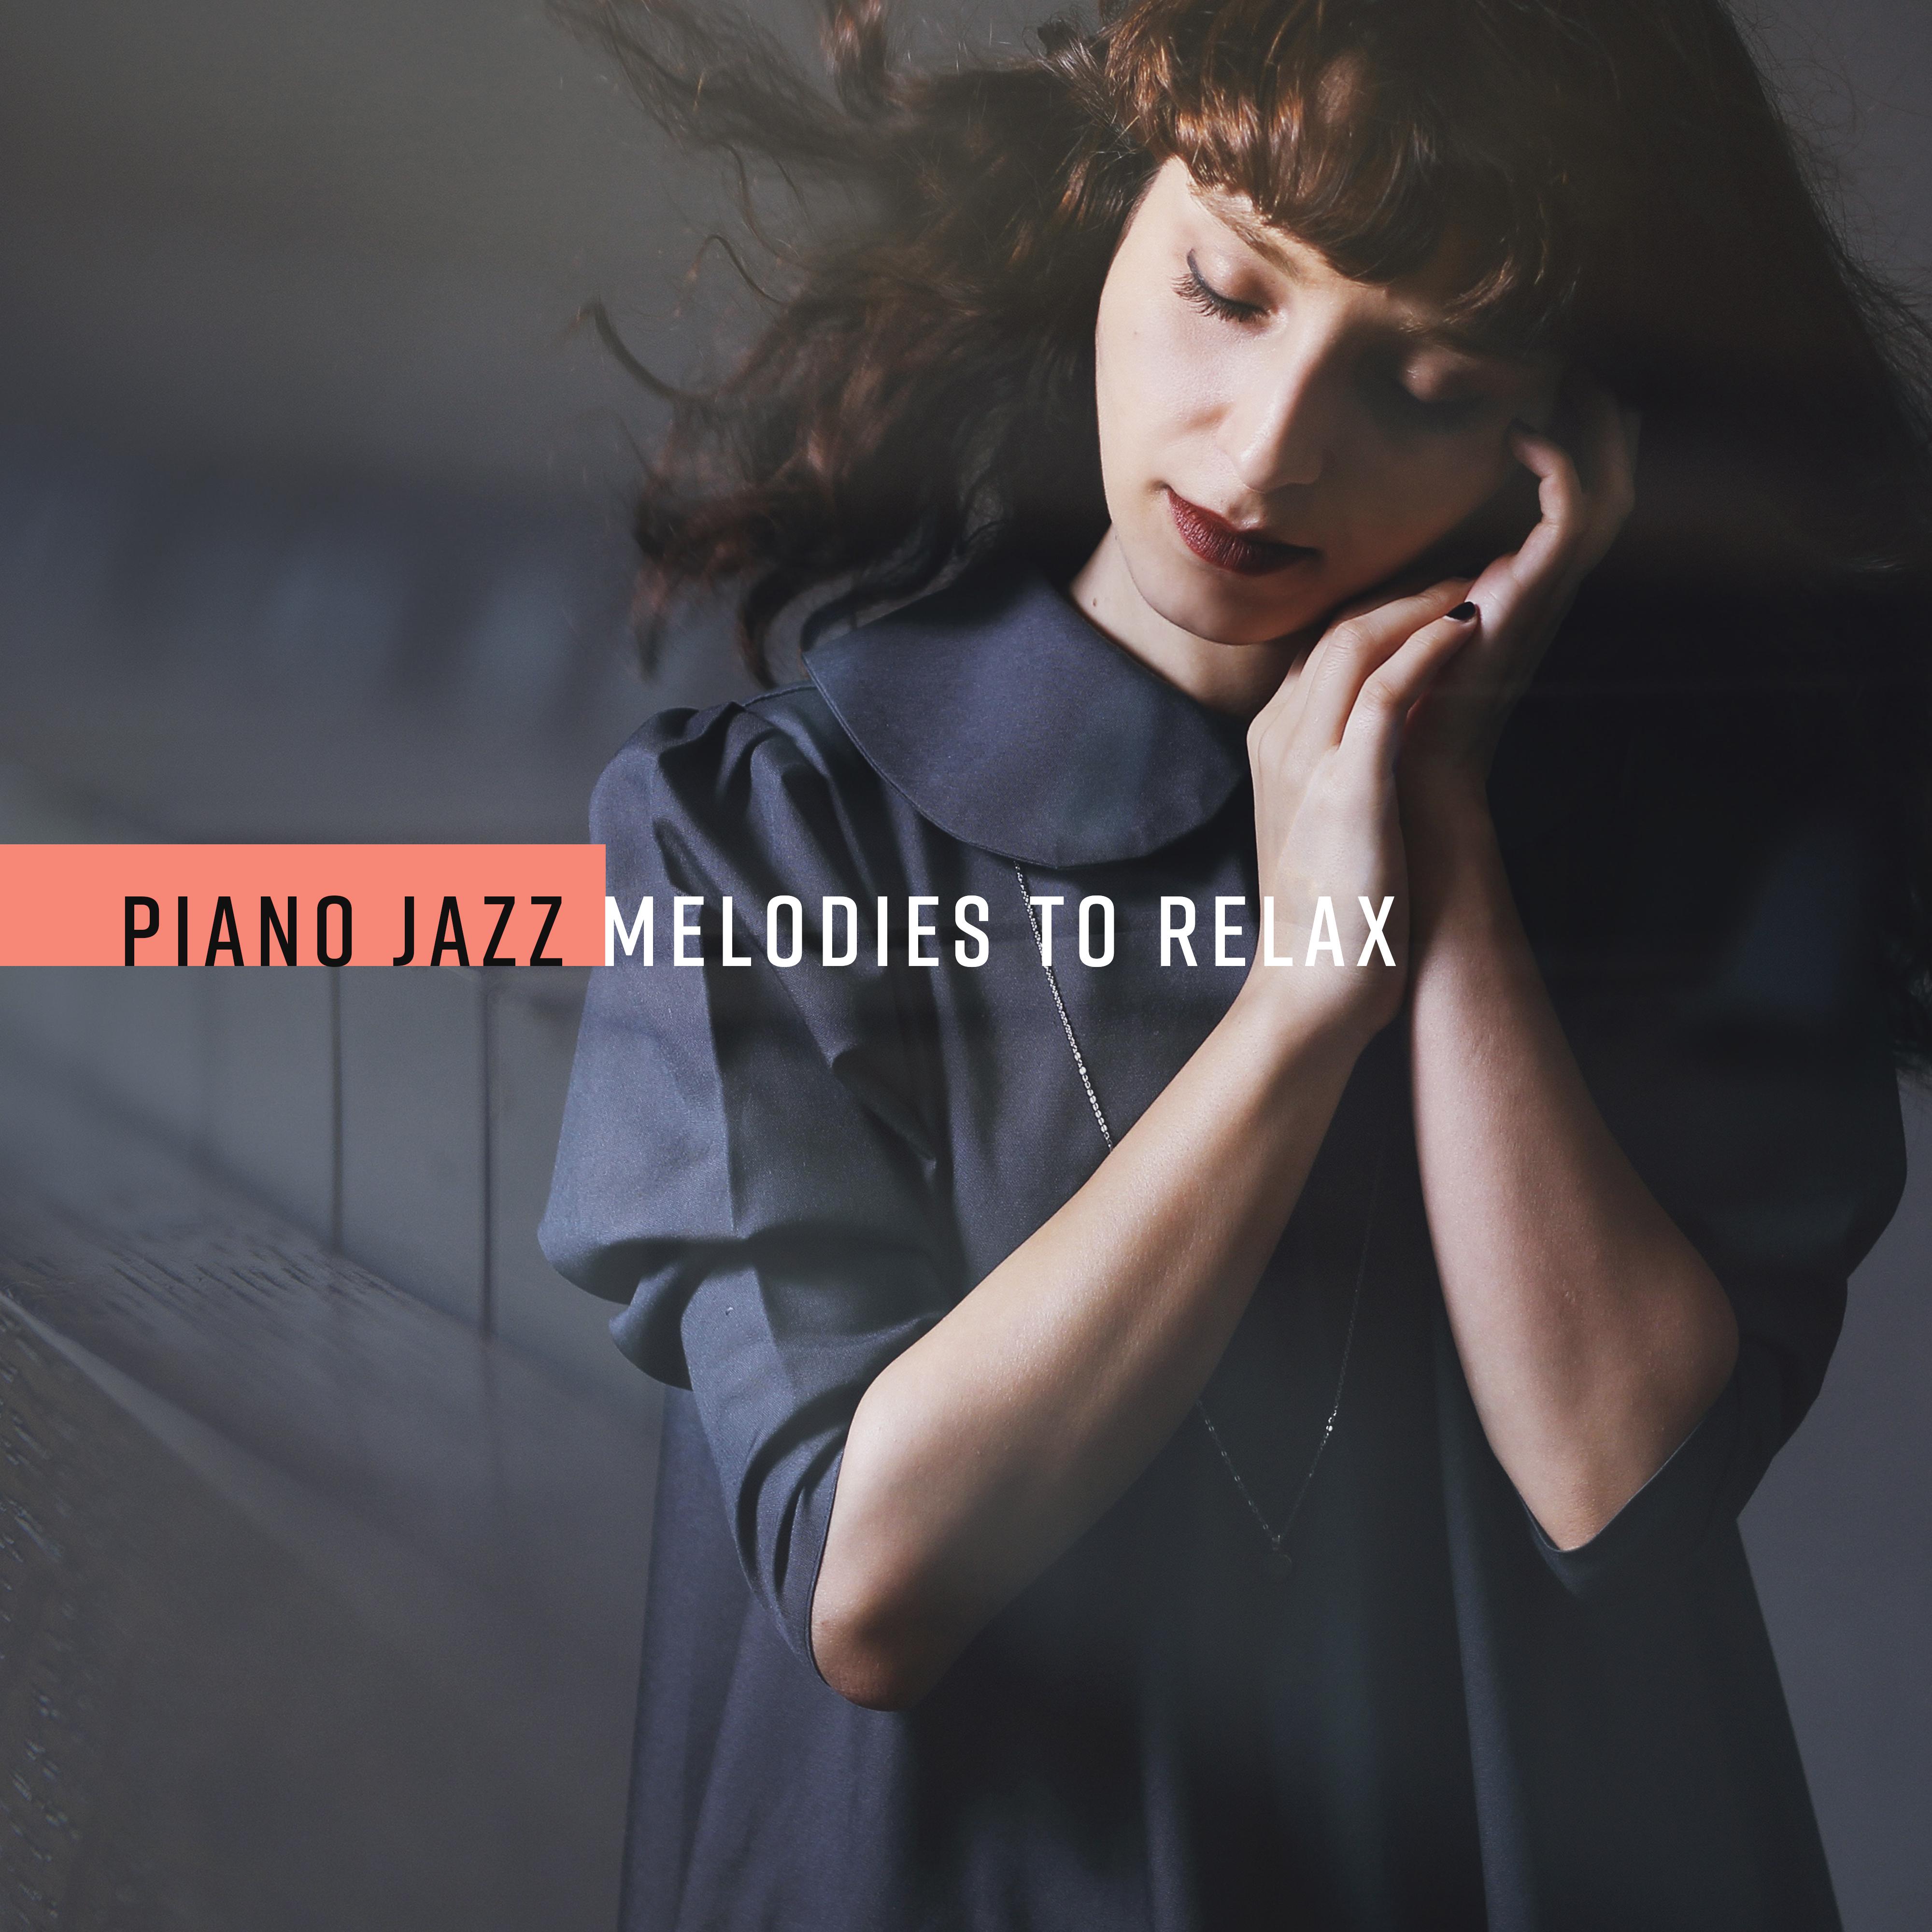 Piano Jazz Melodies to Relax